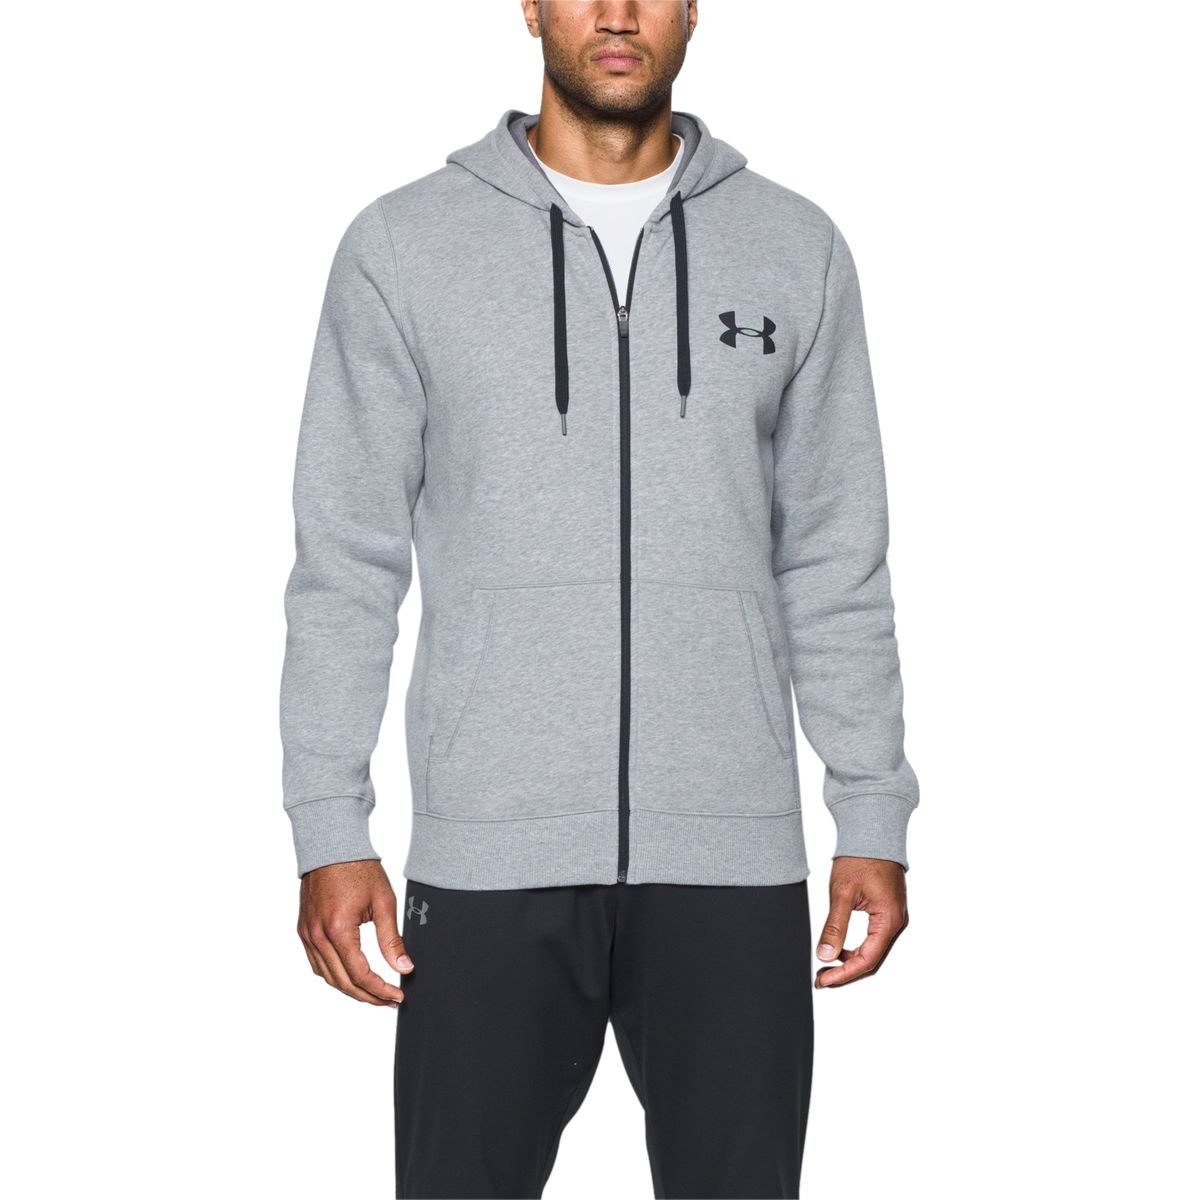 Under Armour Rival Cotton Full-Zip Hoodie - Men's | Backcountry.com